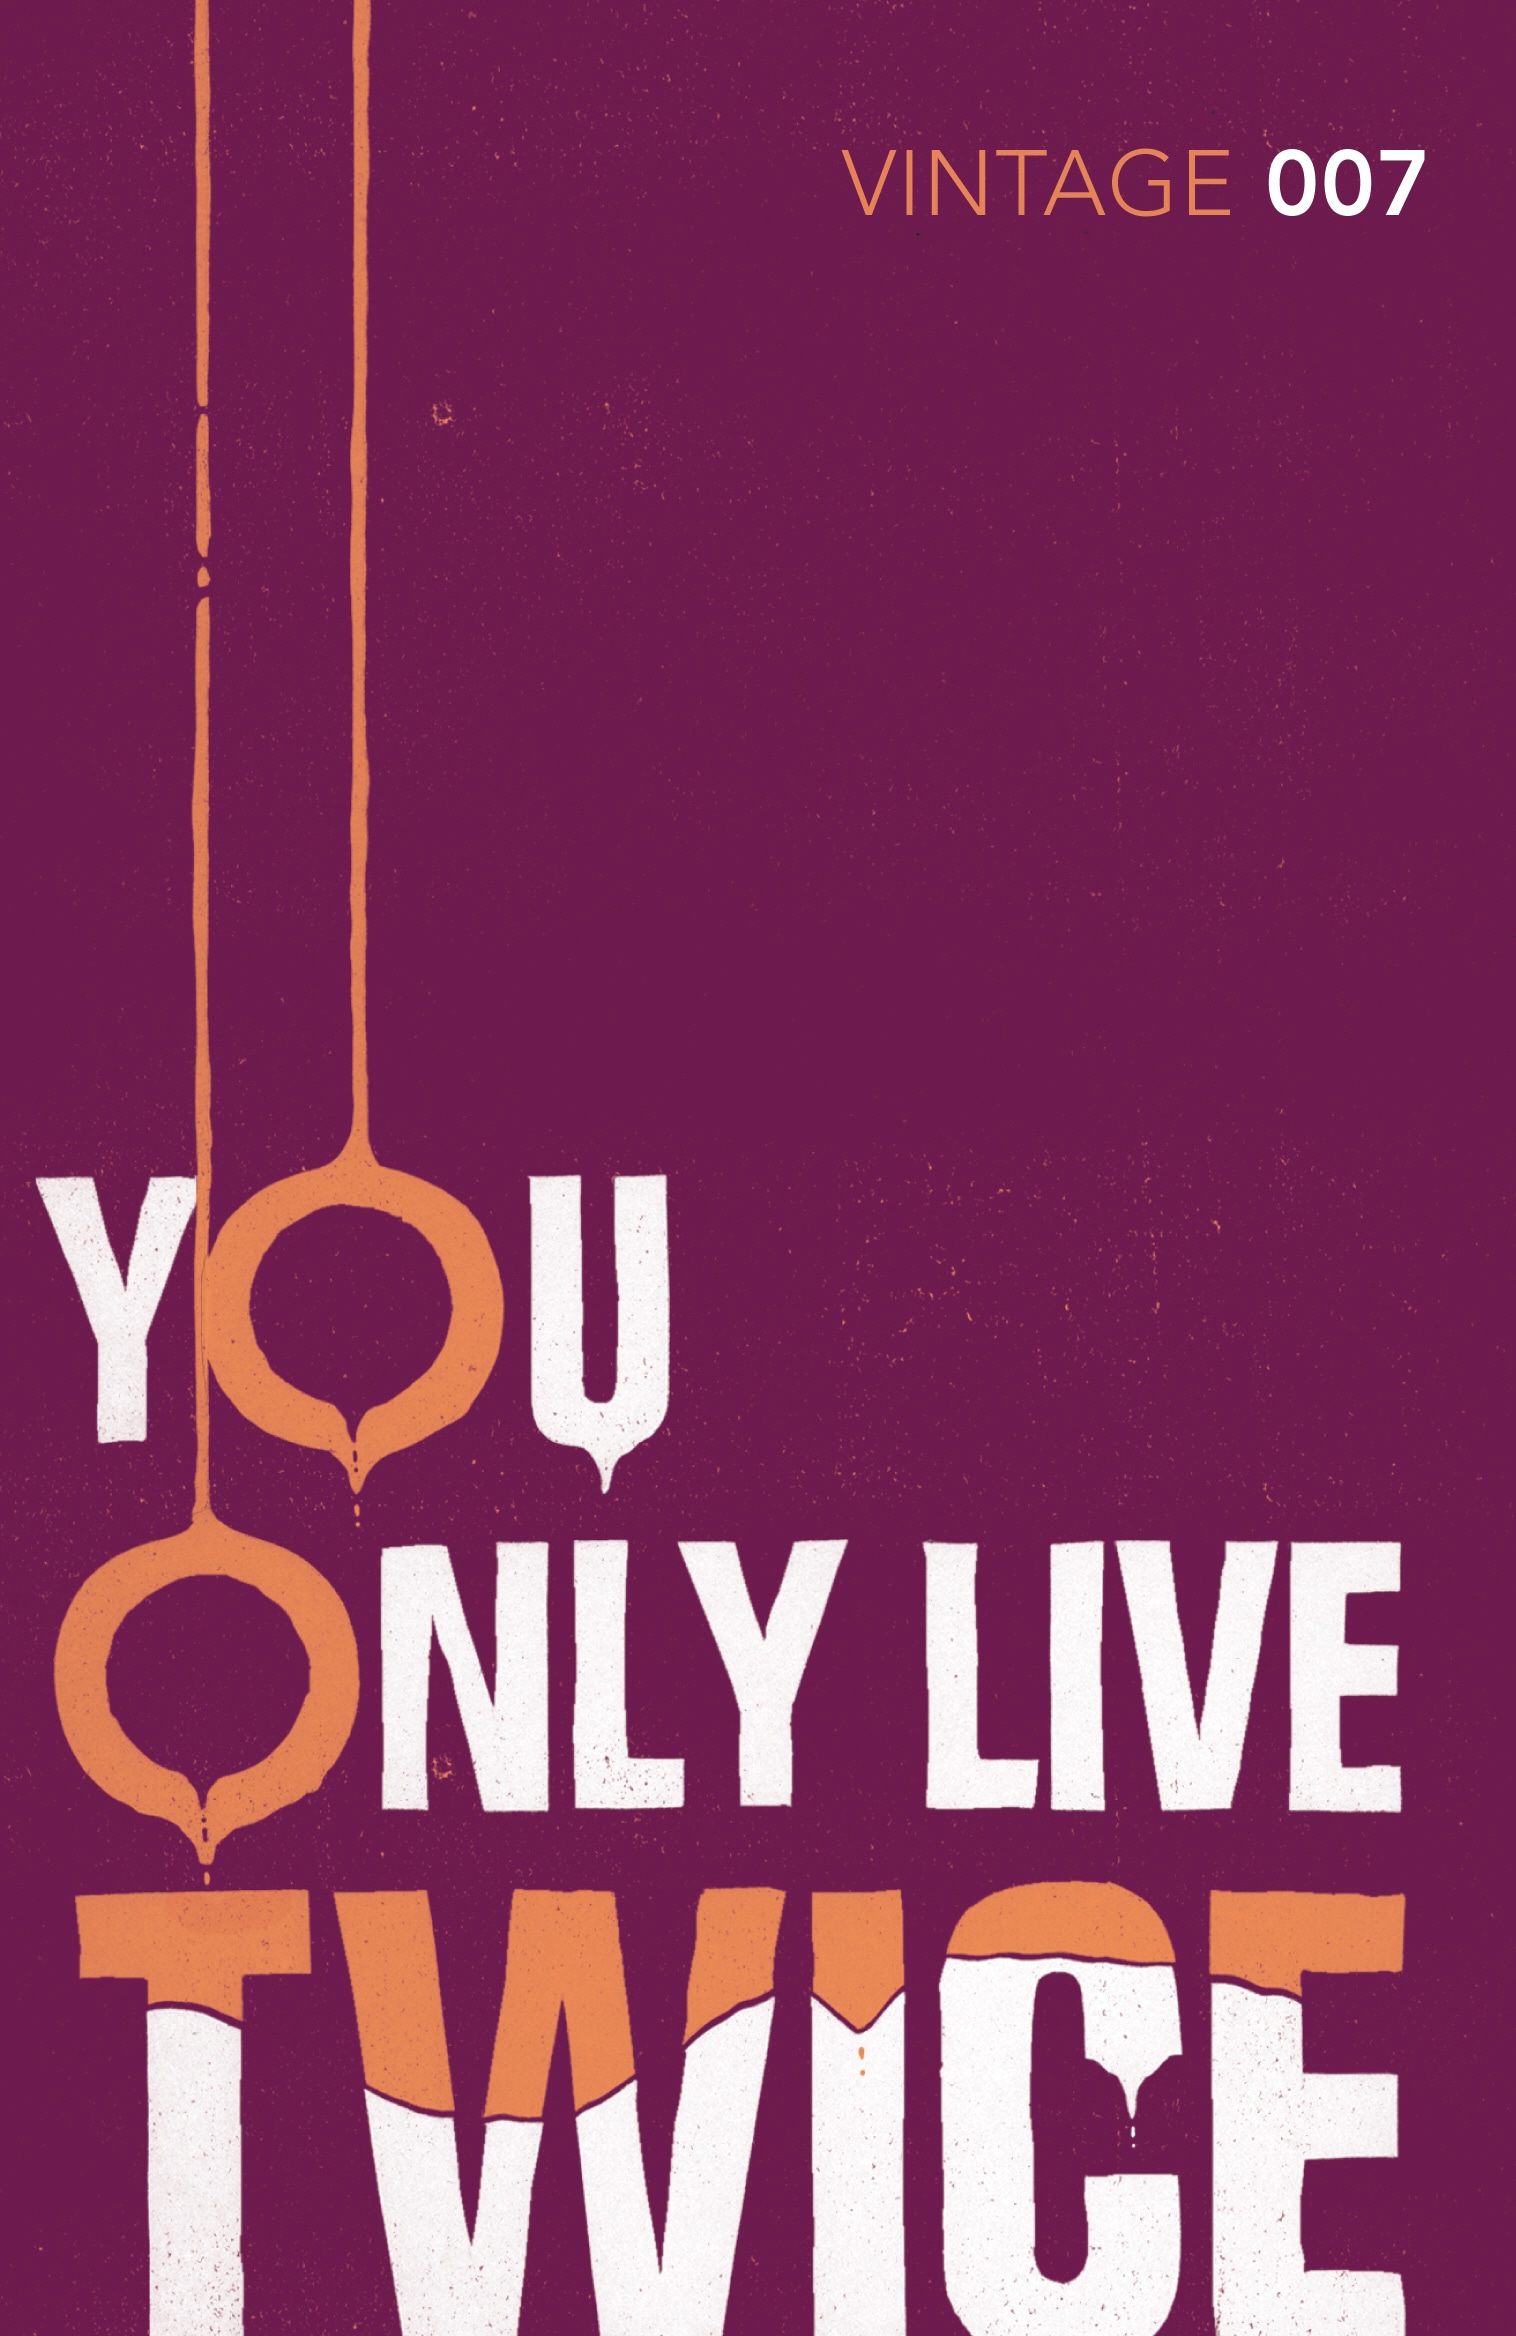 Book “You Only Live Twice” by Ian Fleming — September 6, 2012